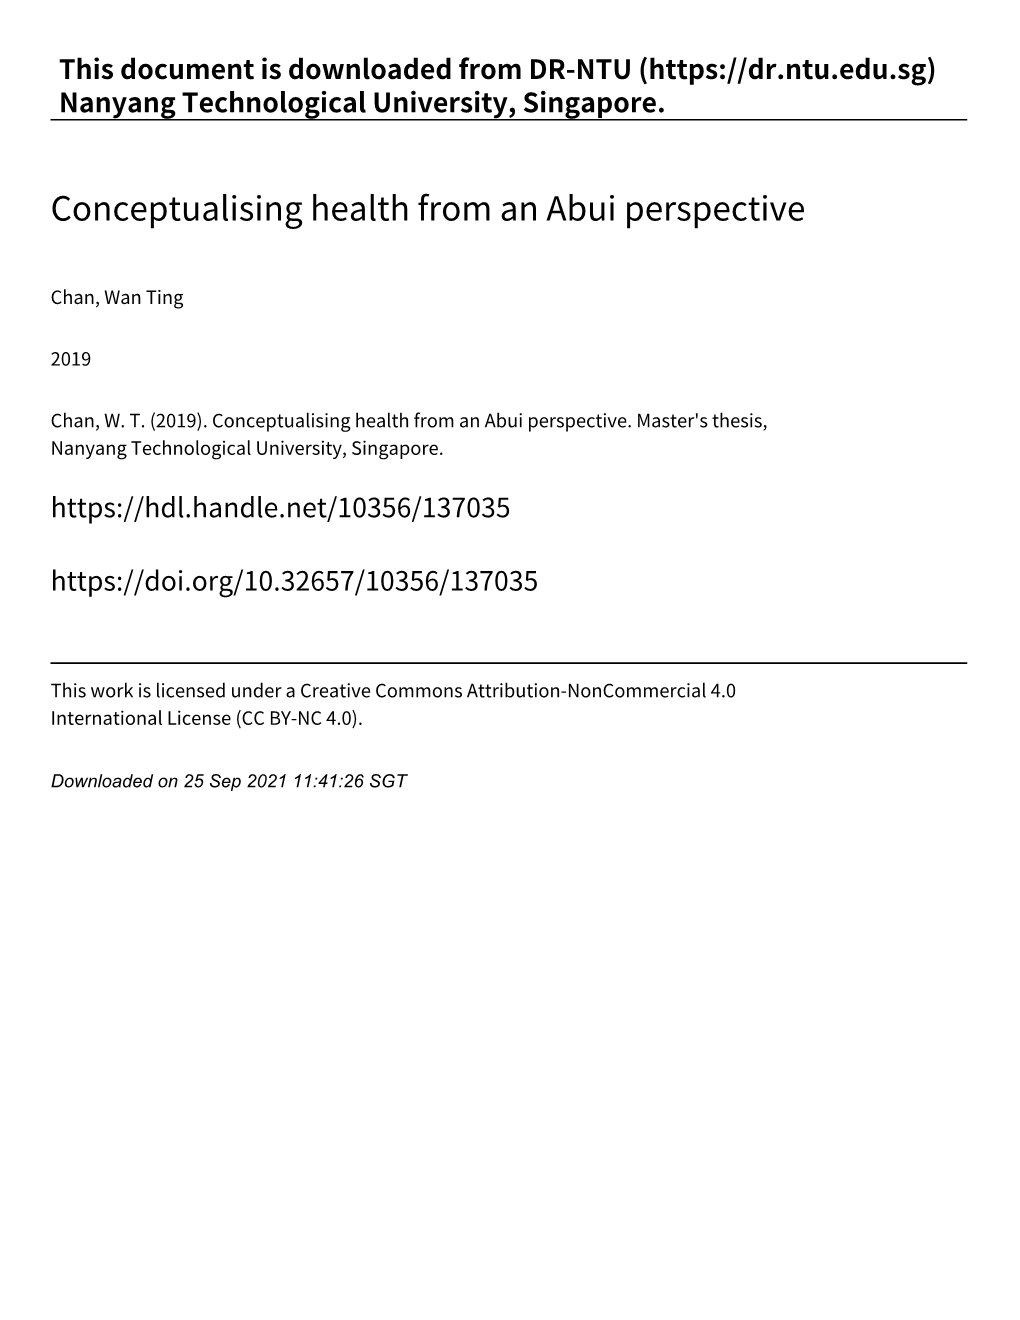 Conceptualising Health from an Abui Perspective